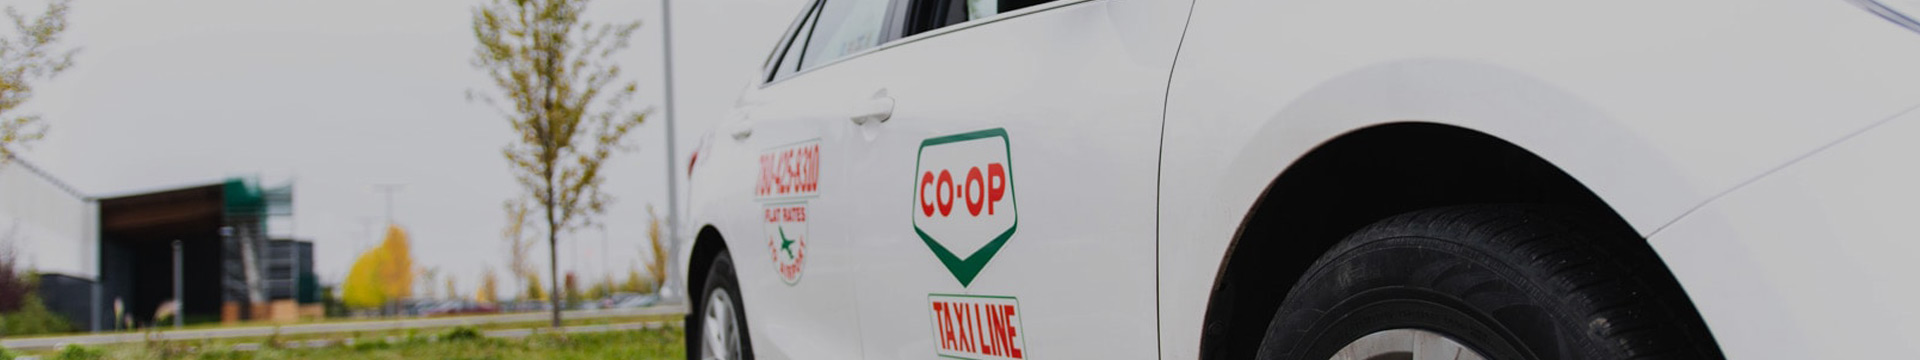 Photo for company Co-op Taxi